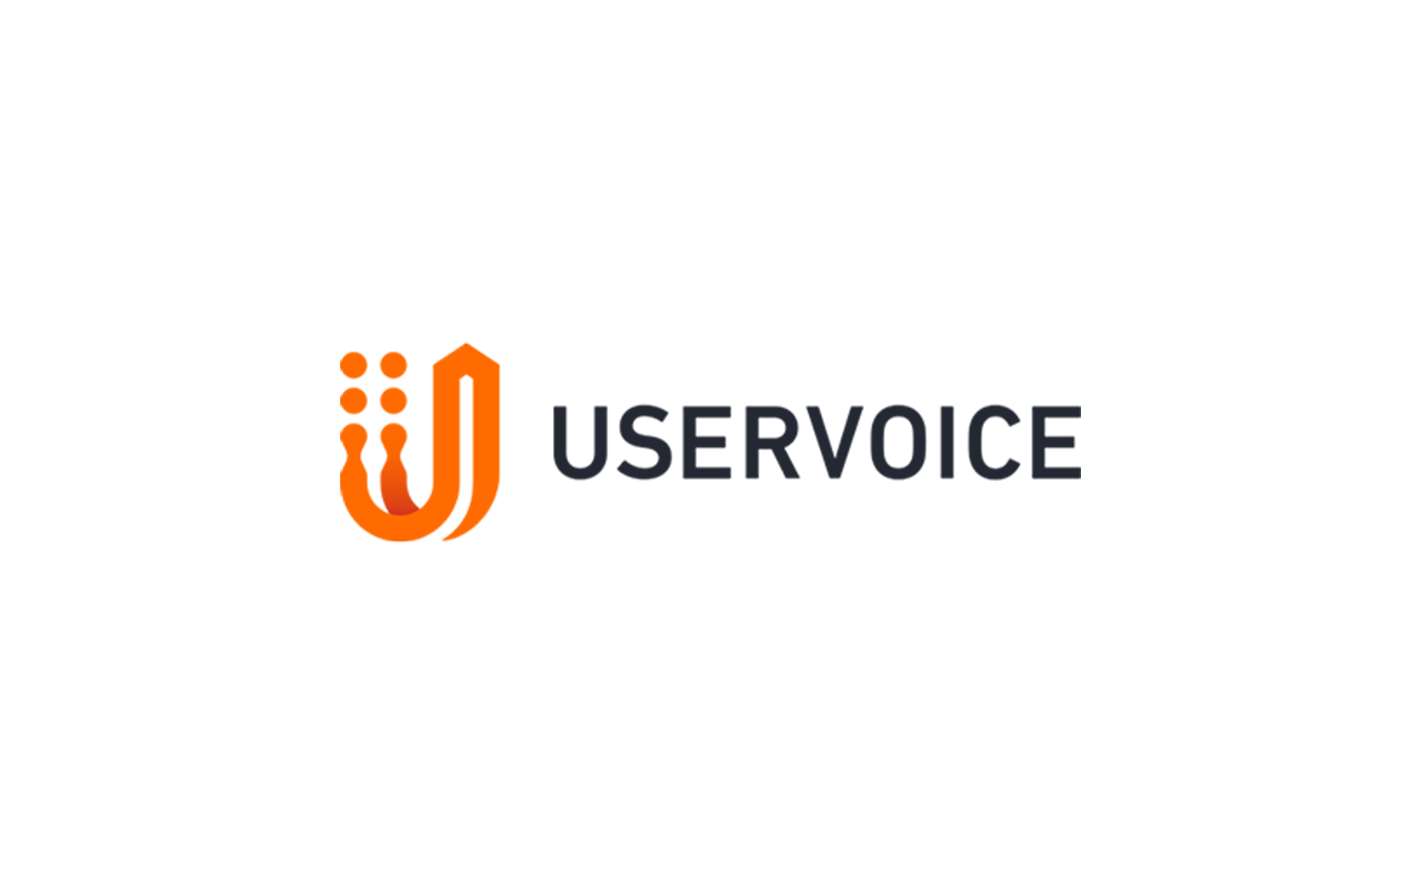 The logo for UserVoice.